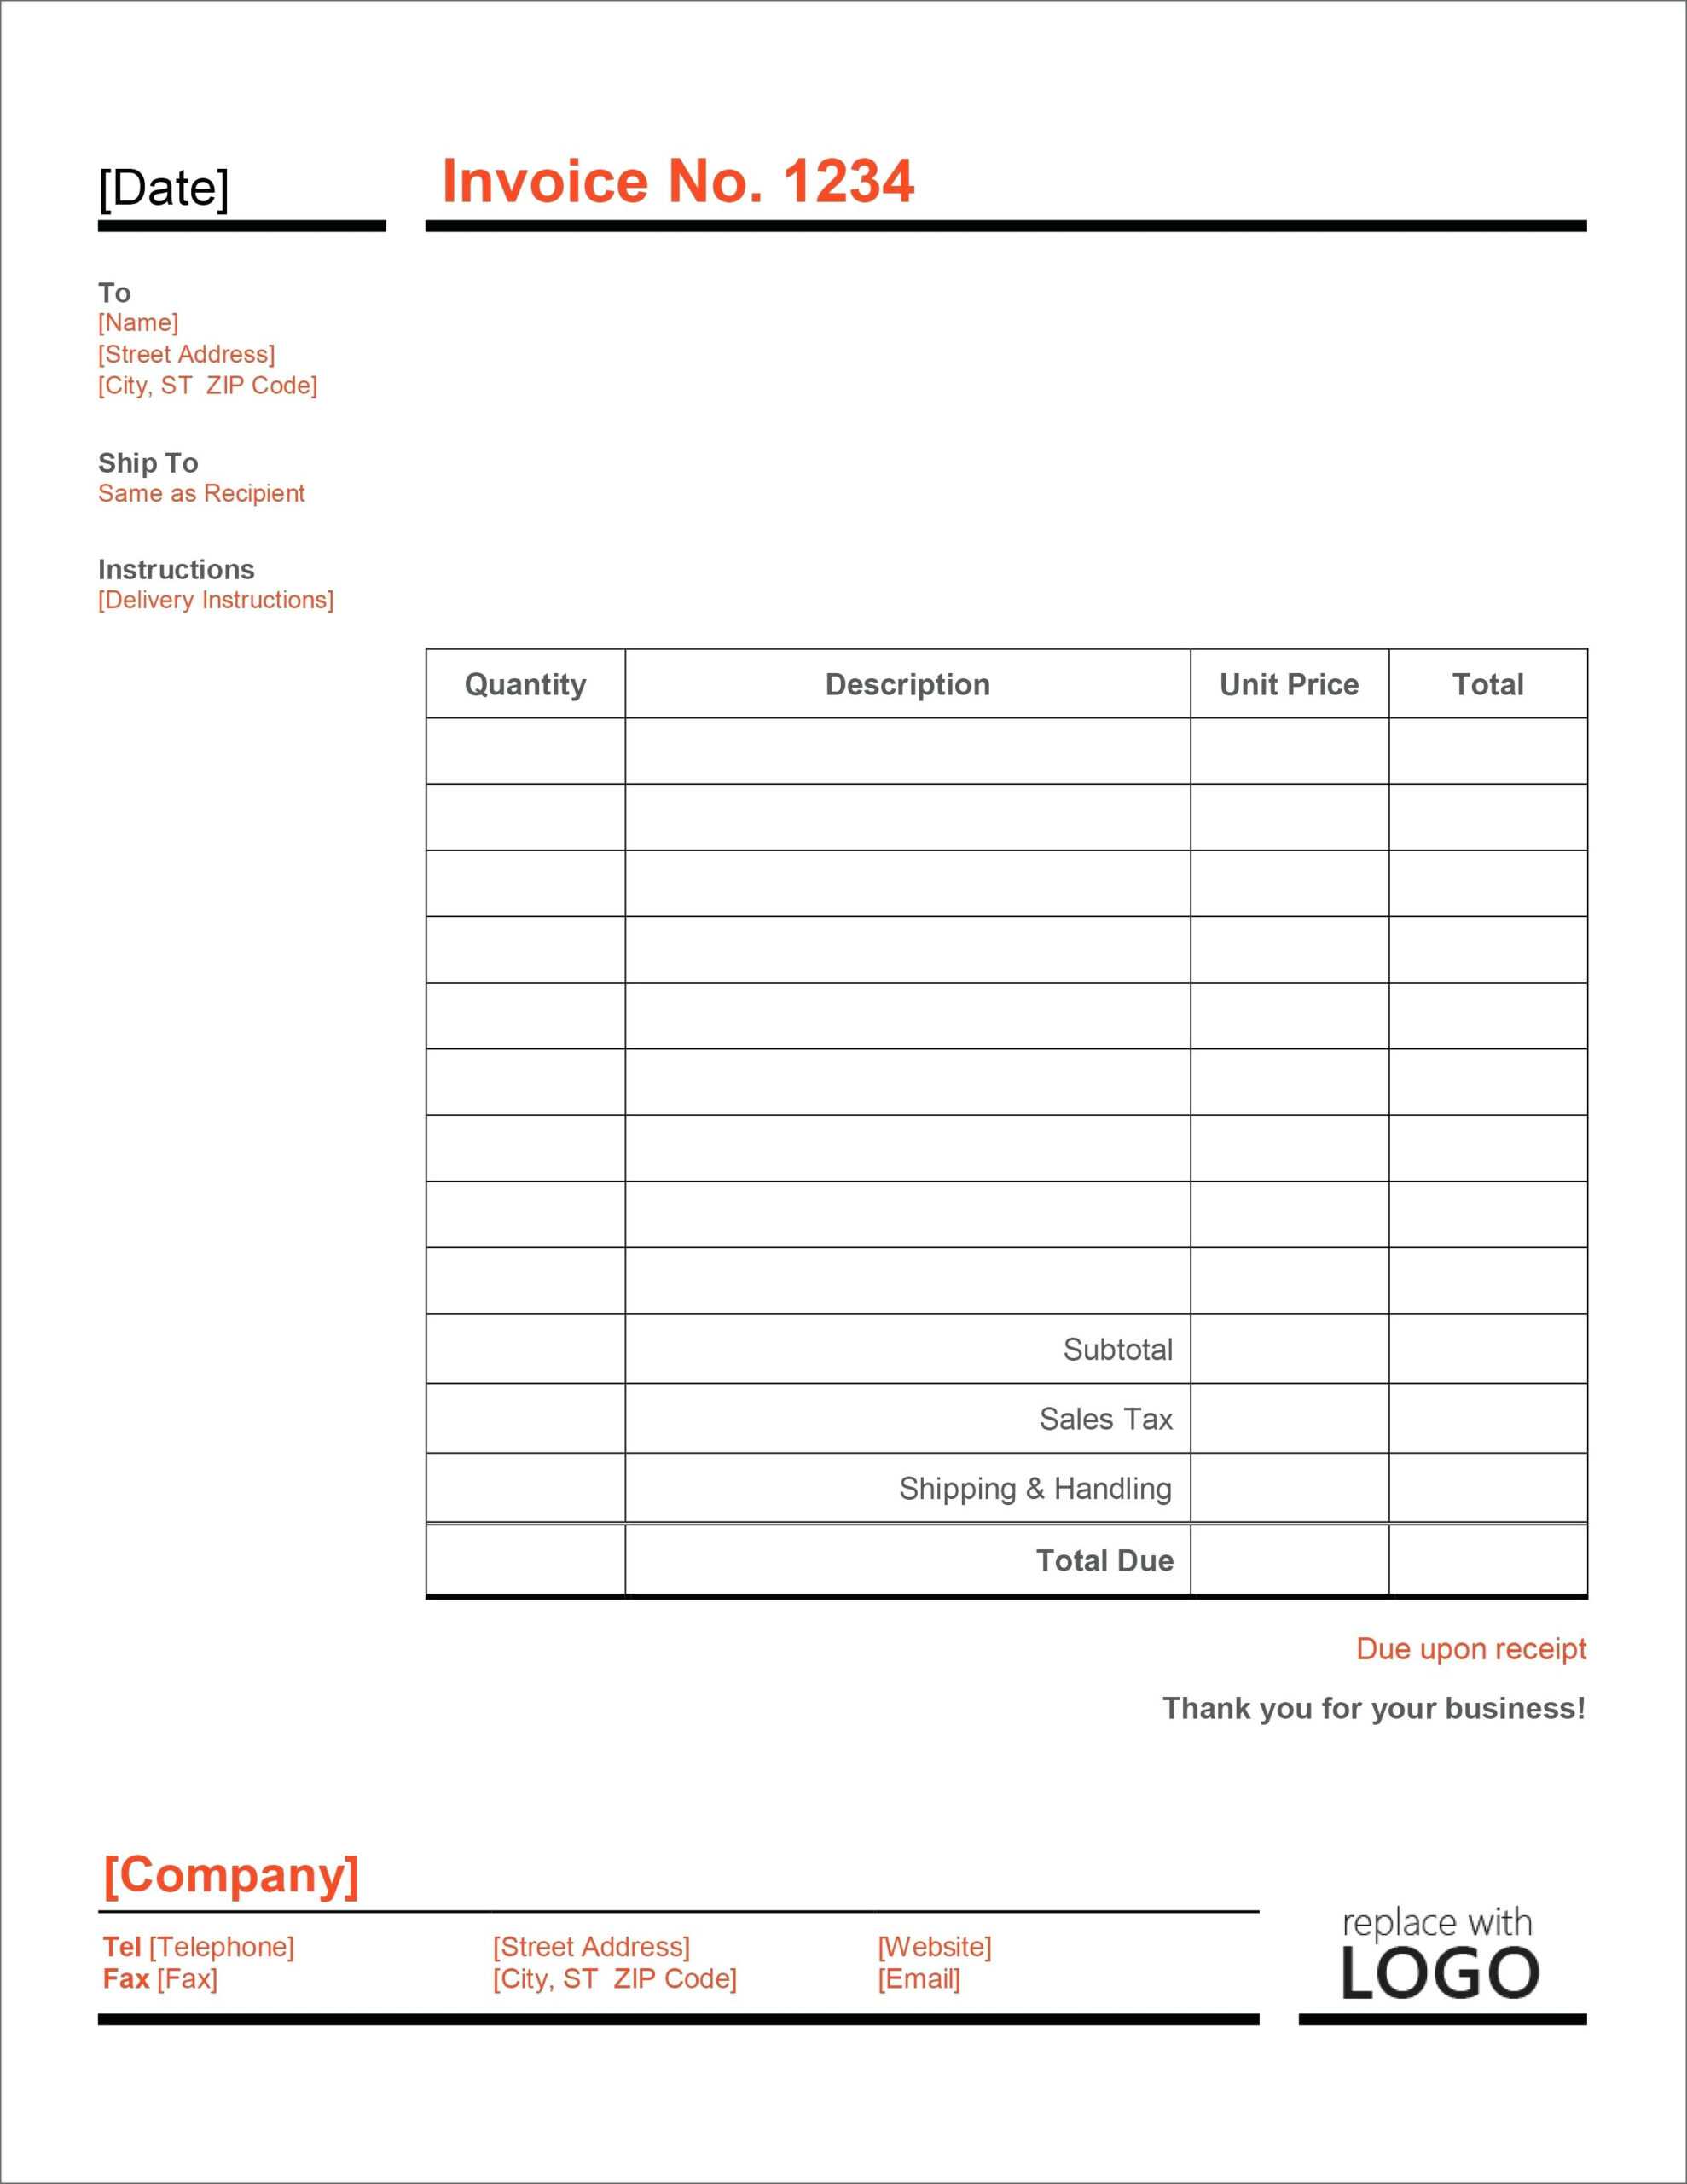 Credit Card Receipt Template Word – Vmarques Regarding Credit Card Receipt Template